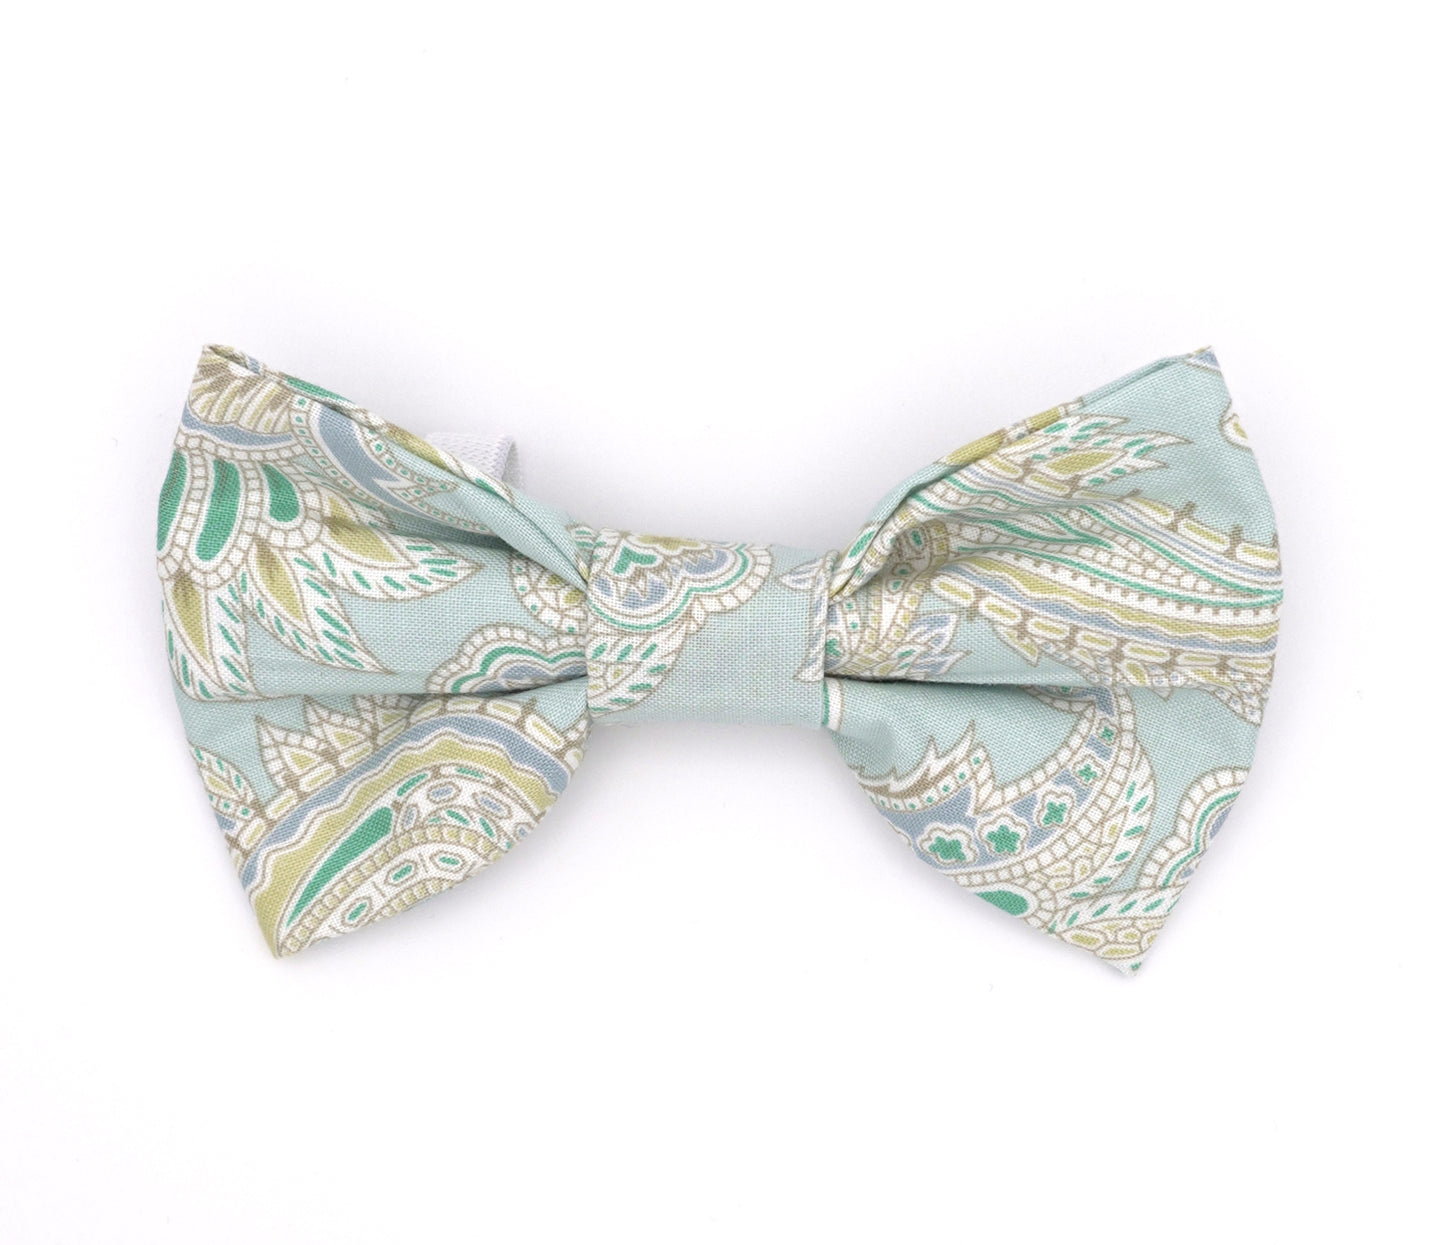 Handmade cotton bow tie for dogs (or other pets). Elastic straps on back with snaps make it easy to add to collar, harness, or leash. Light blue background with turquoise, apple-green, steel-blue, white and gold paisley pattern.